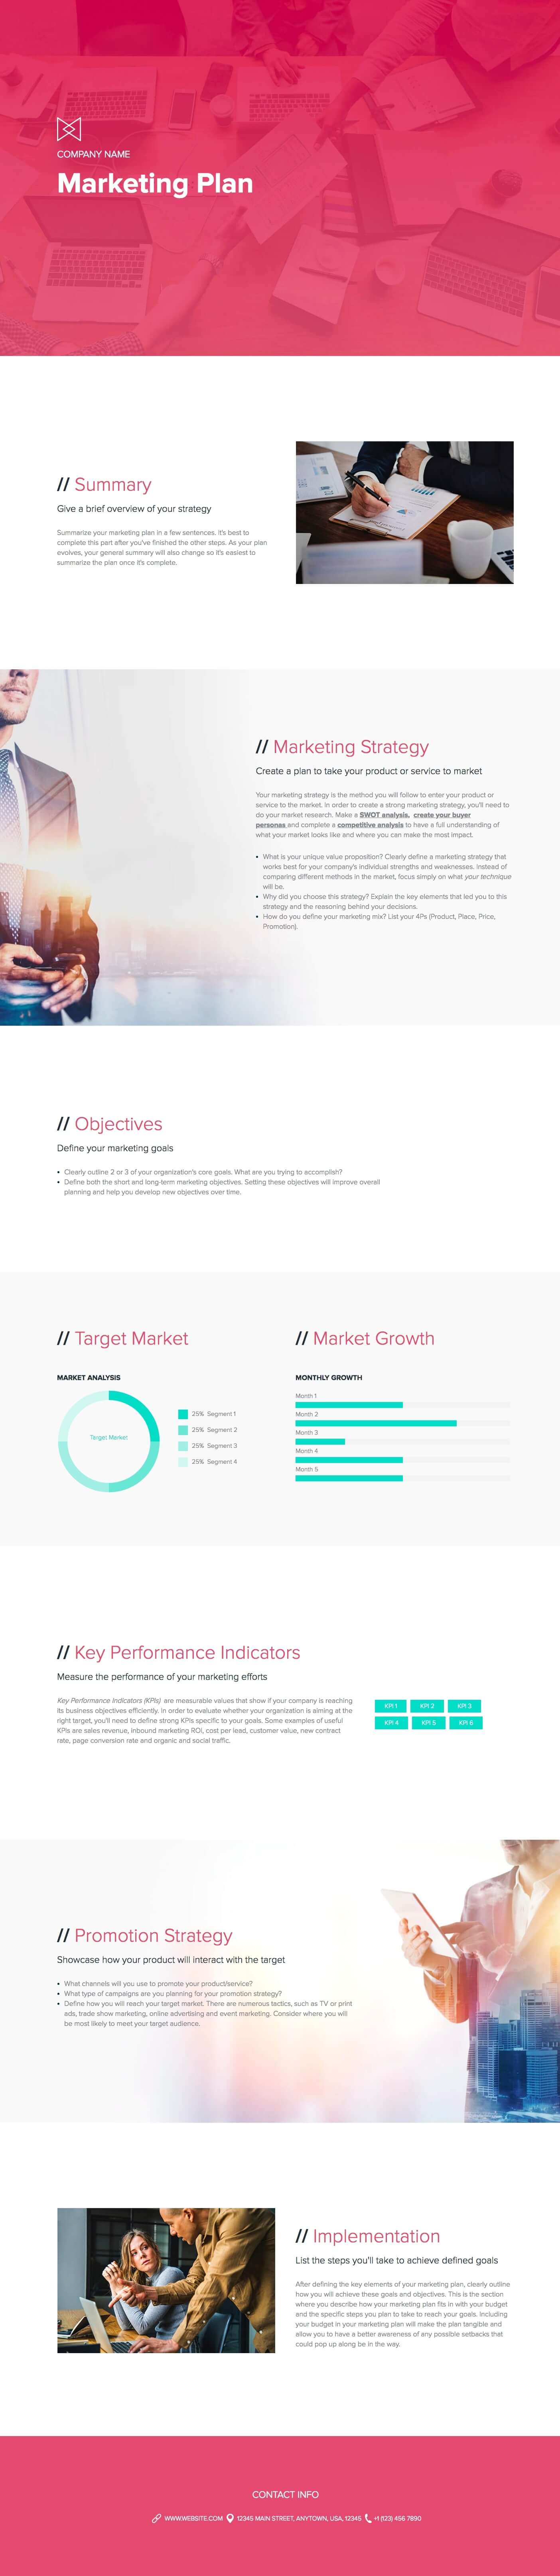 Product Marketing Strategy Template from xtensio.com